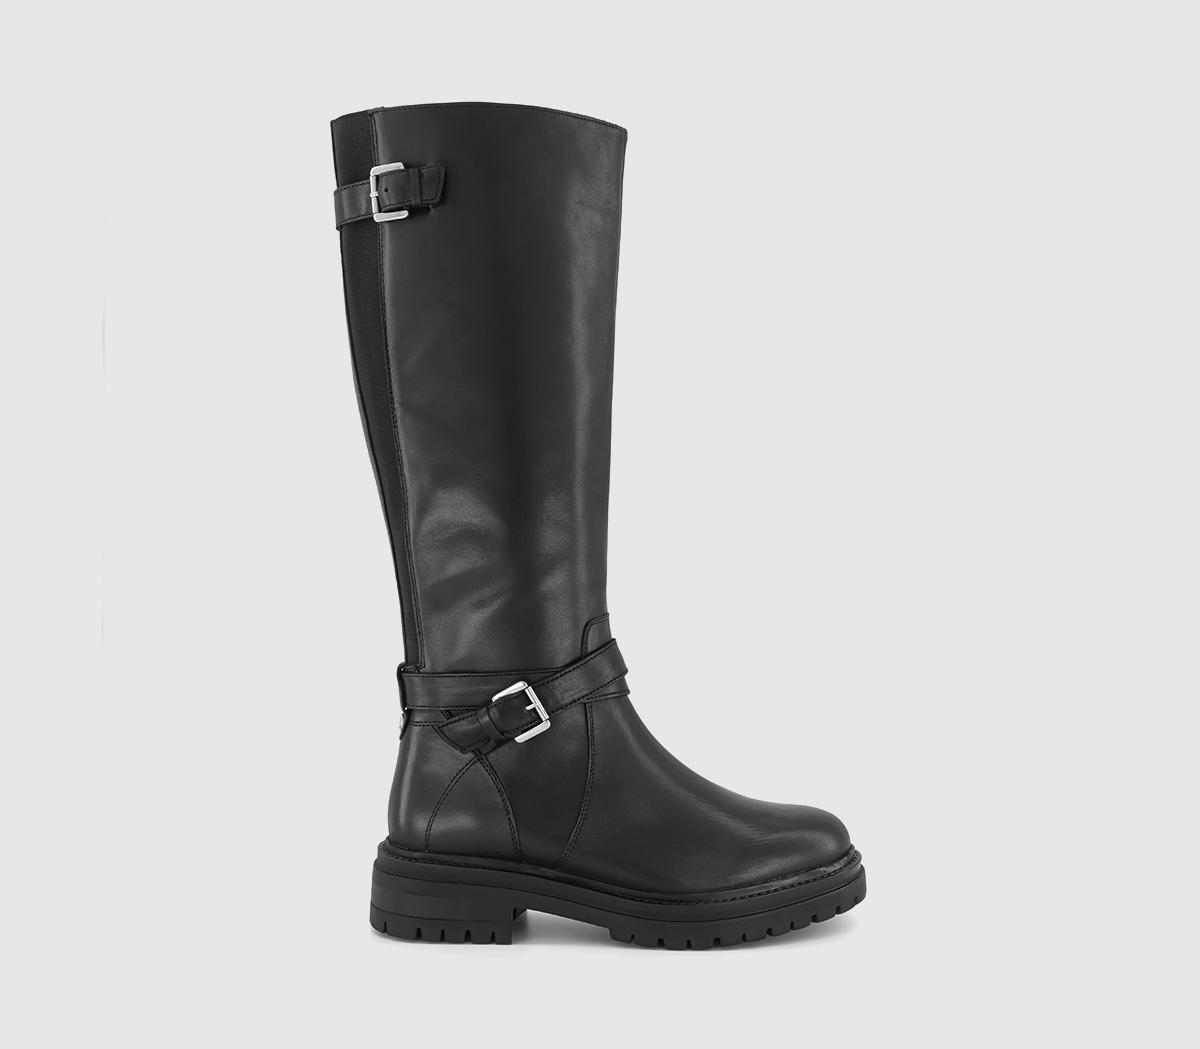 OFFICEKrissy Buckle Strap Knee High Rider BootsBlack Leather